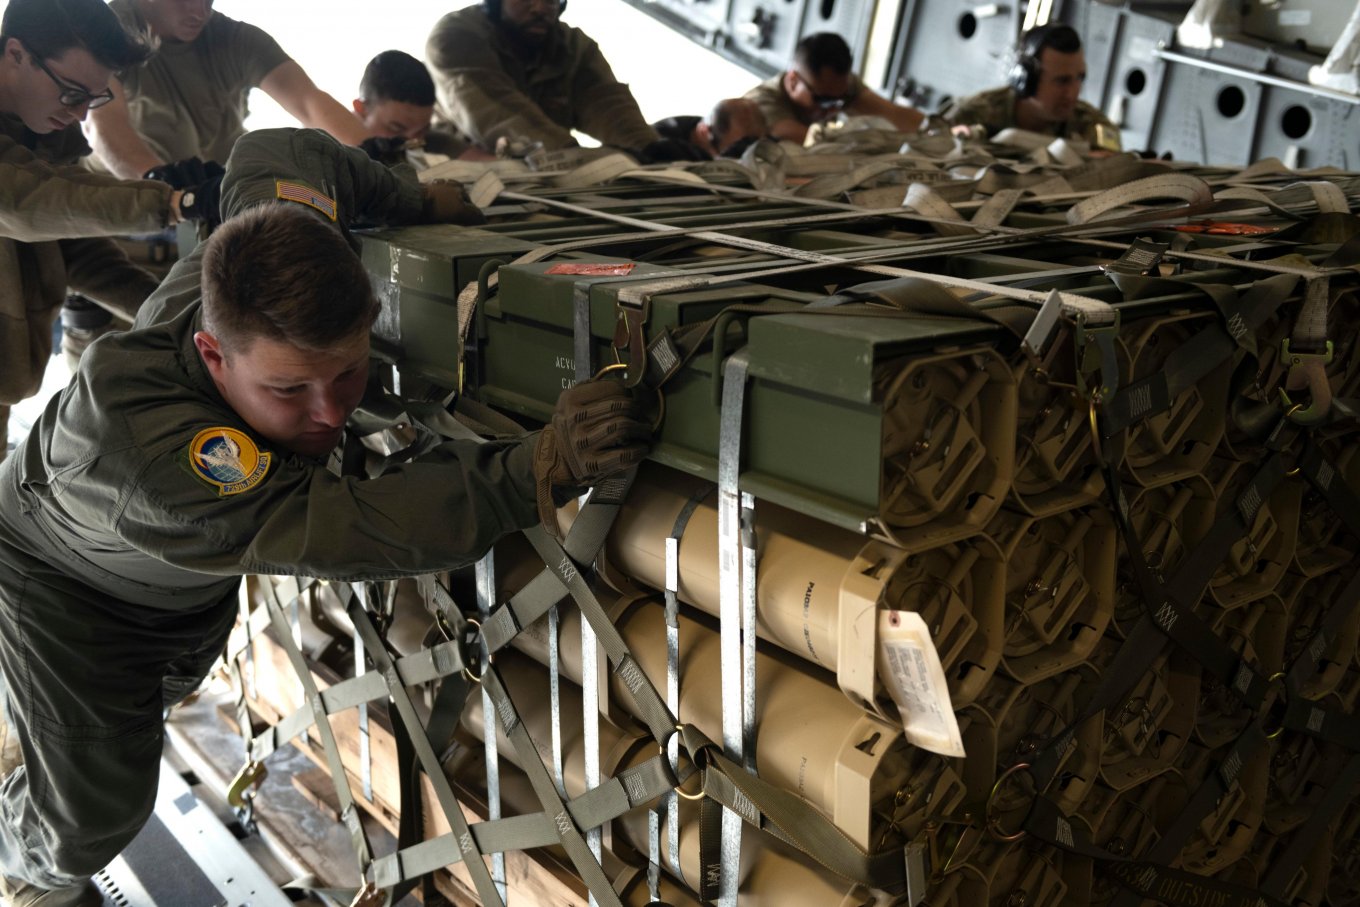 U.S. Air Force airmen load pallets of 155mm howitzer rounds for shipment to Ukraine. April 2022, Travis Air Force Base, Calif.